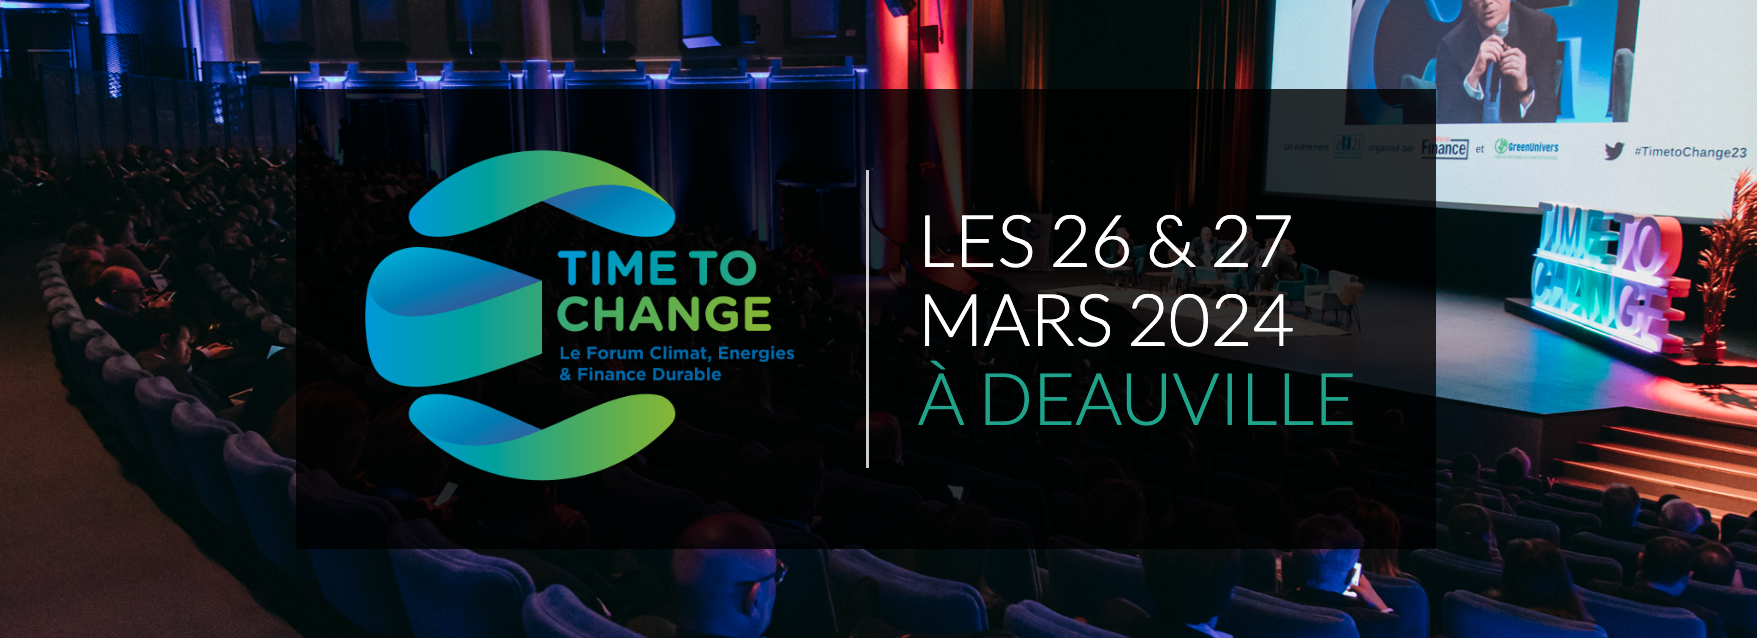 Time To Change - Deauville - 2024